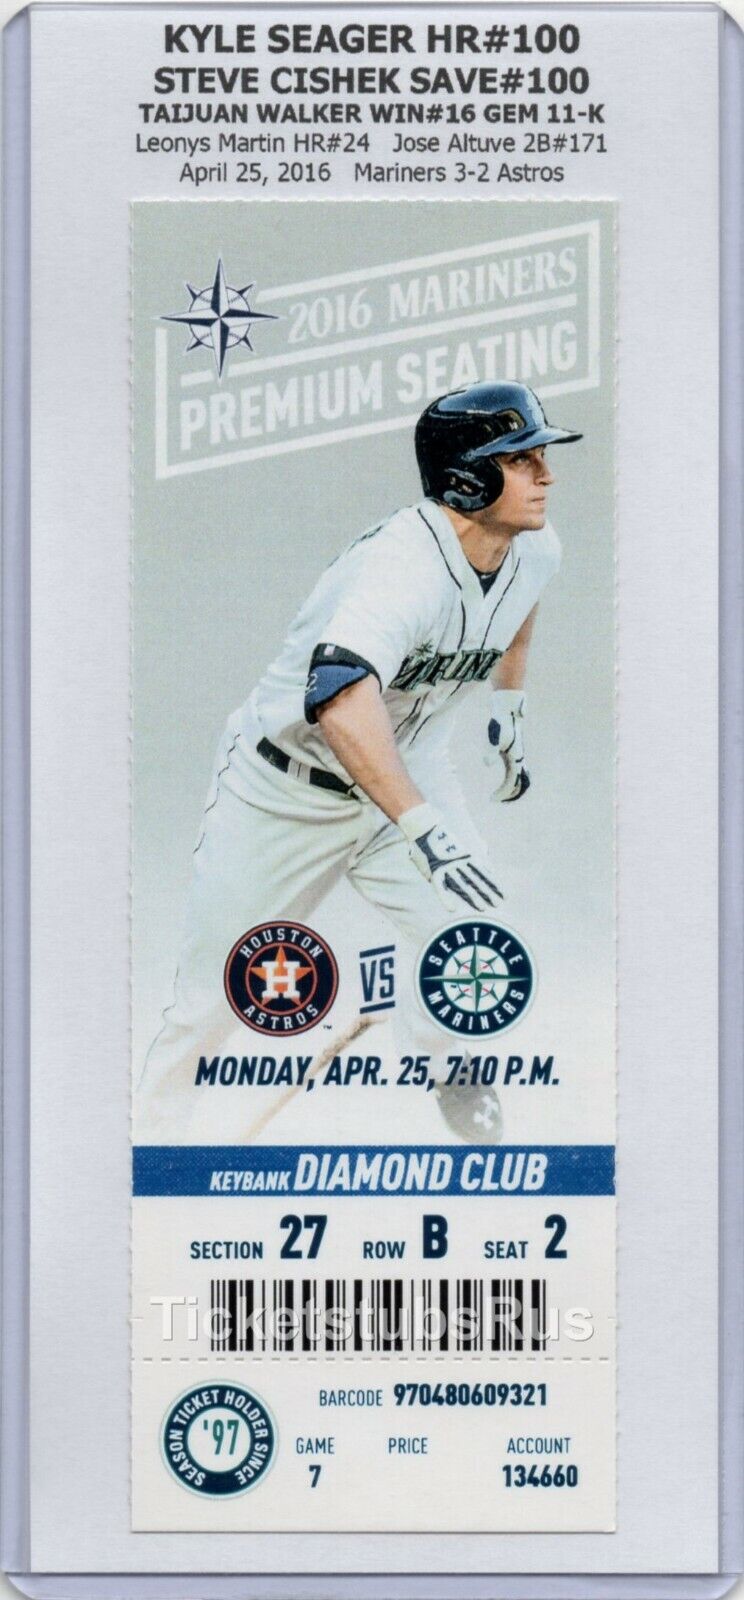 Kyle Seager HR #100 Cishek 100th SAVE 2016 Mariners Astros 4/25 CLUB Ticket RARE